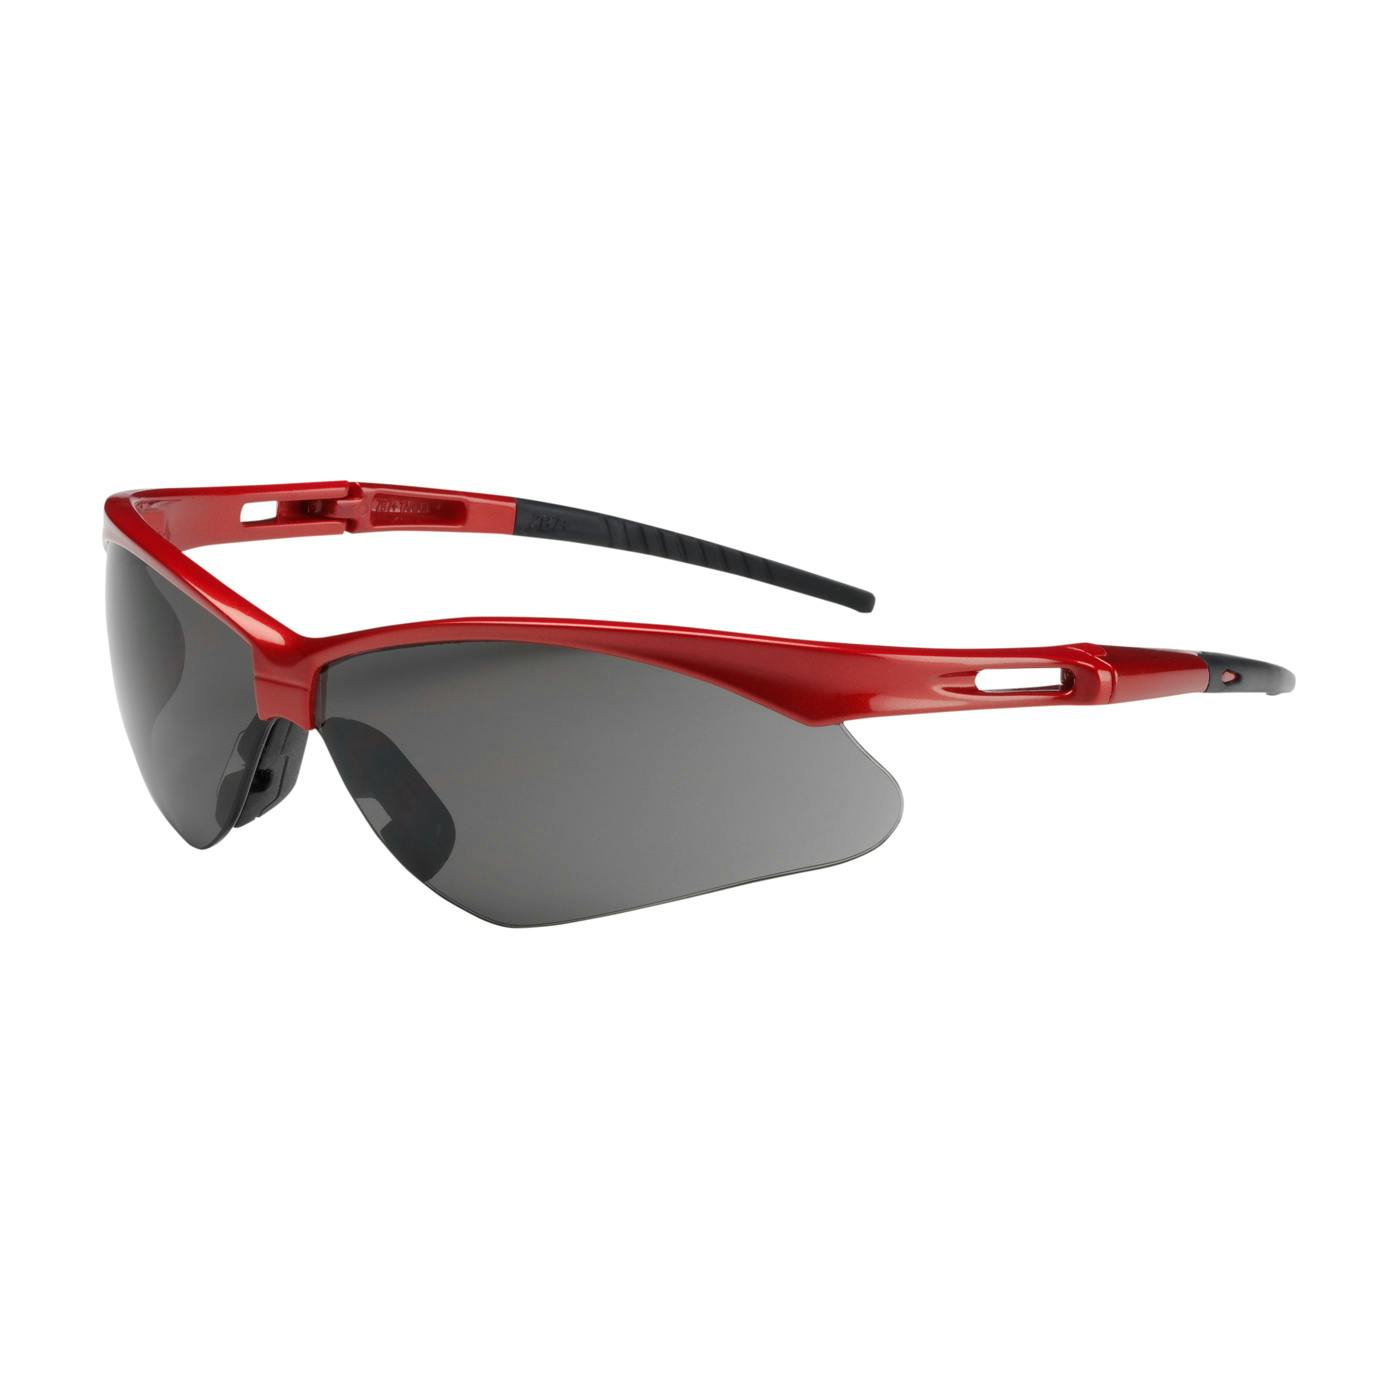 Semi-Rimless Safety Glasses with Red Frame, Gray Lens and Anti-Scratch Coating, Red (250-AN-10117) - OS